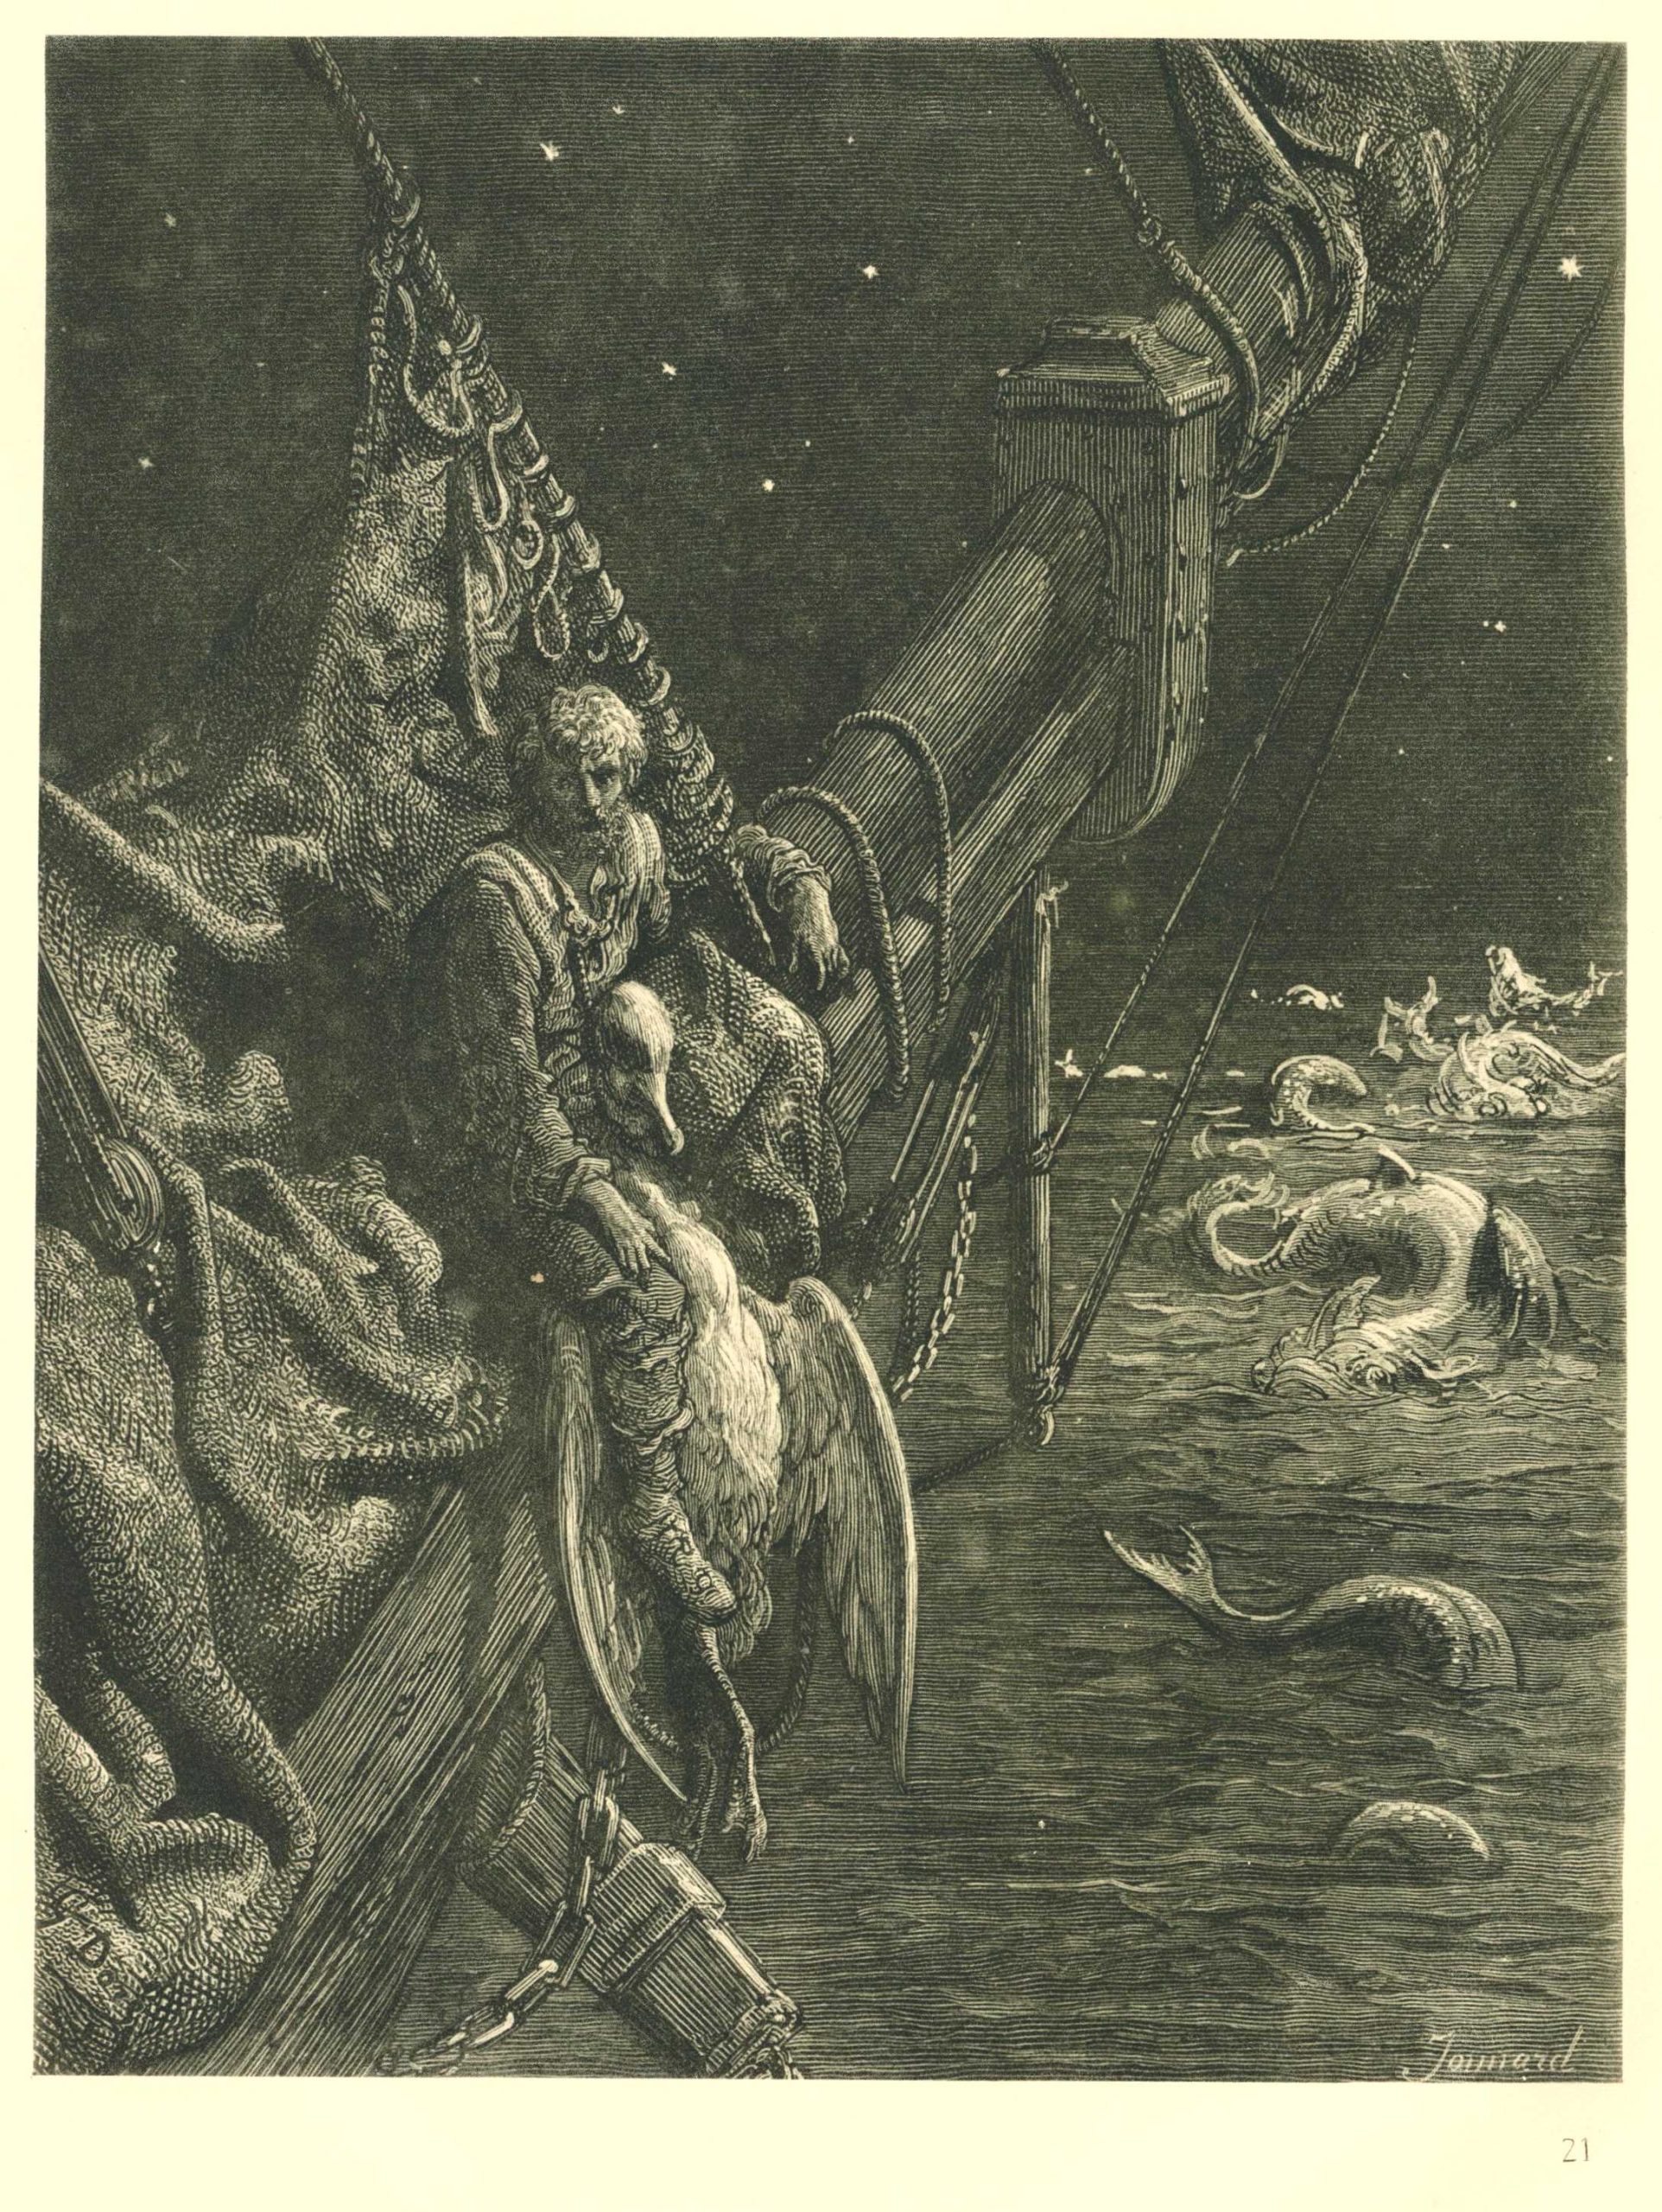 A man sitting with an unconscious albatross on the mast of a ship as sea monsters swim in the ocean below